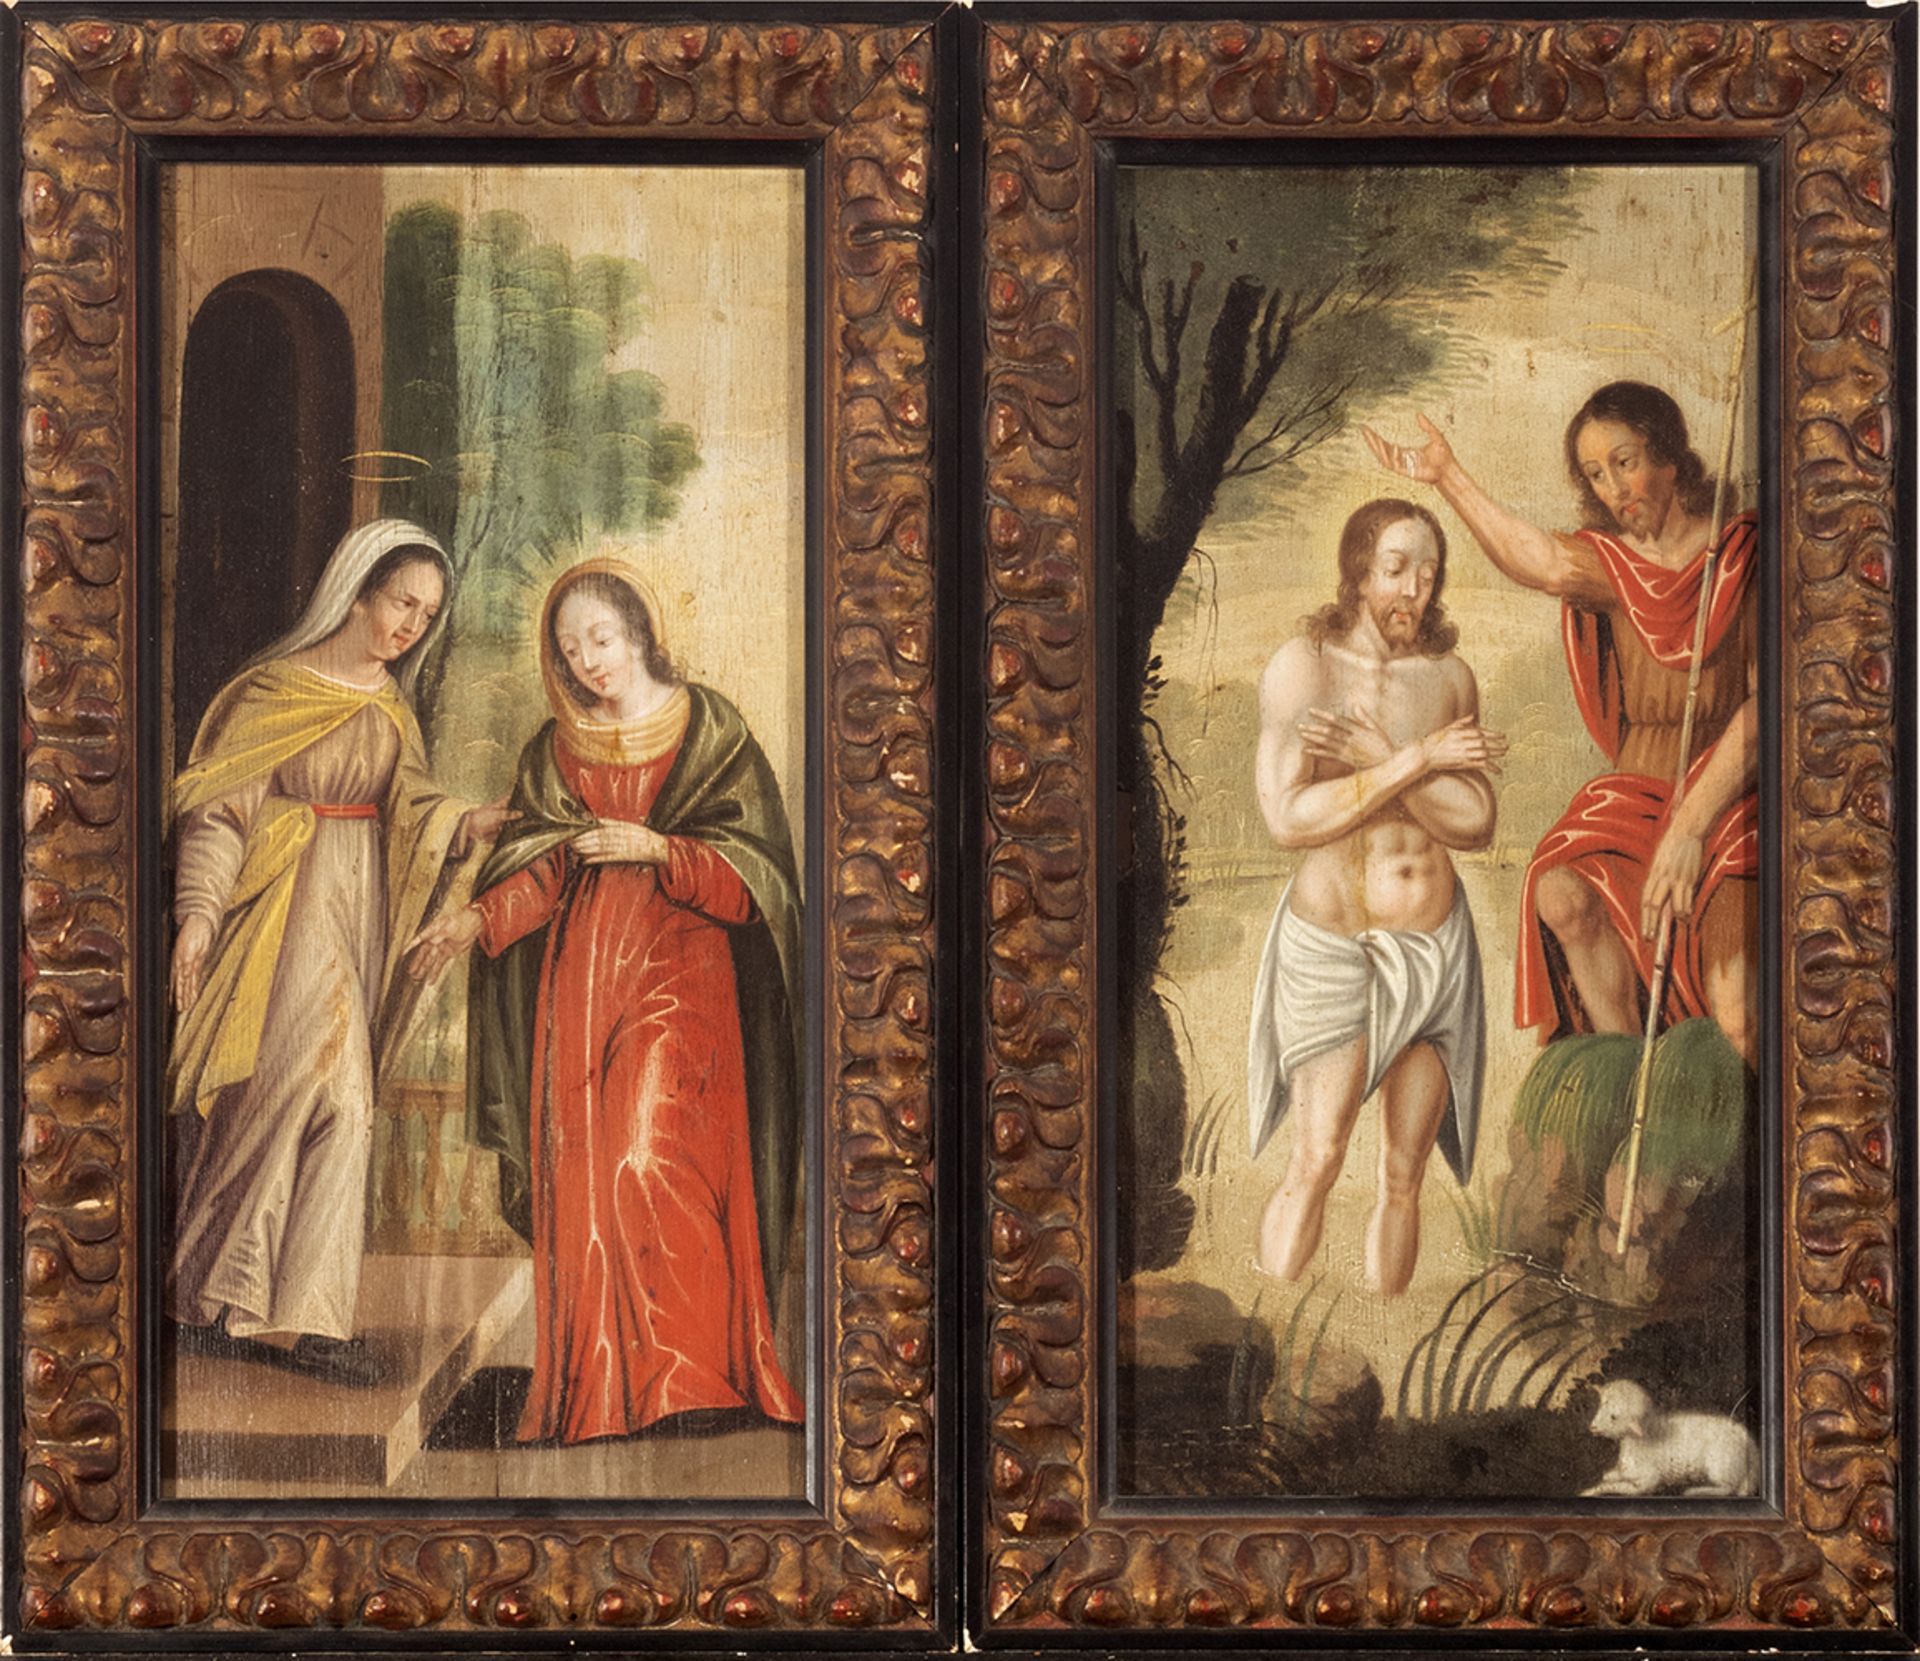 Flemish school, 17th century. The Baptism of Christ and The Visitation.